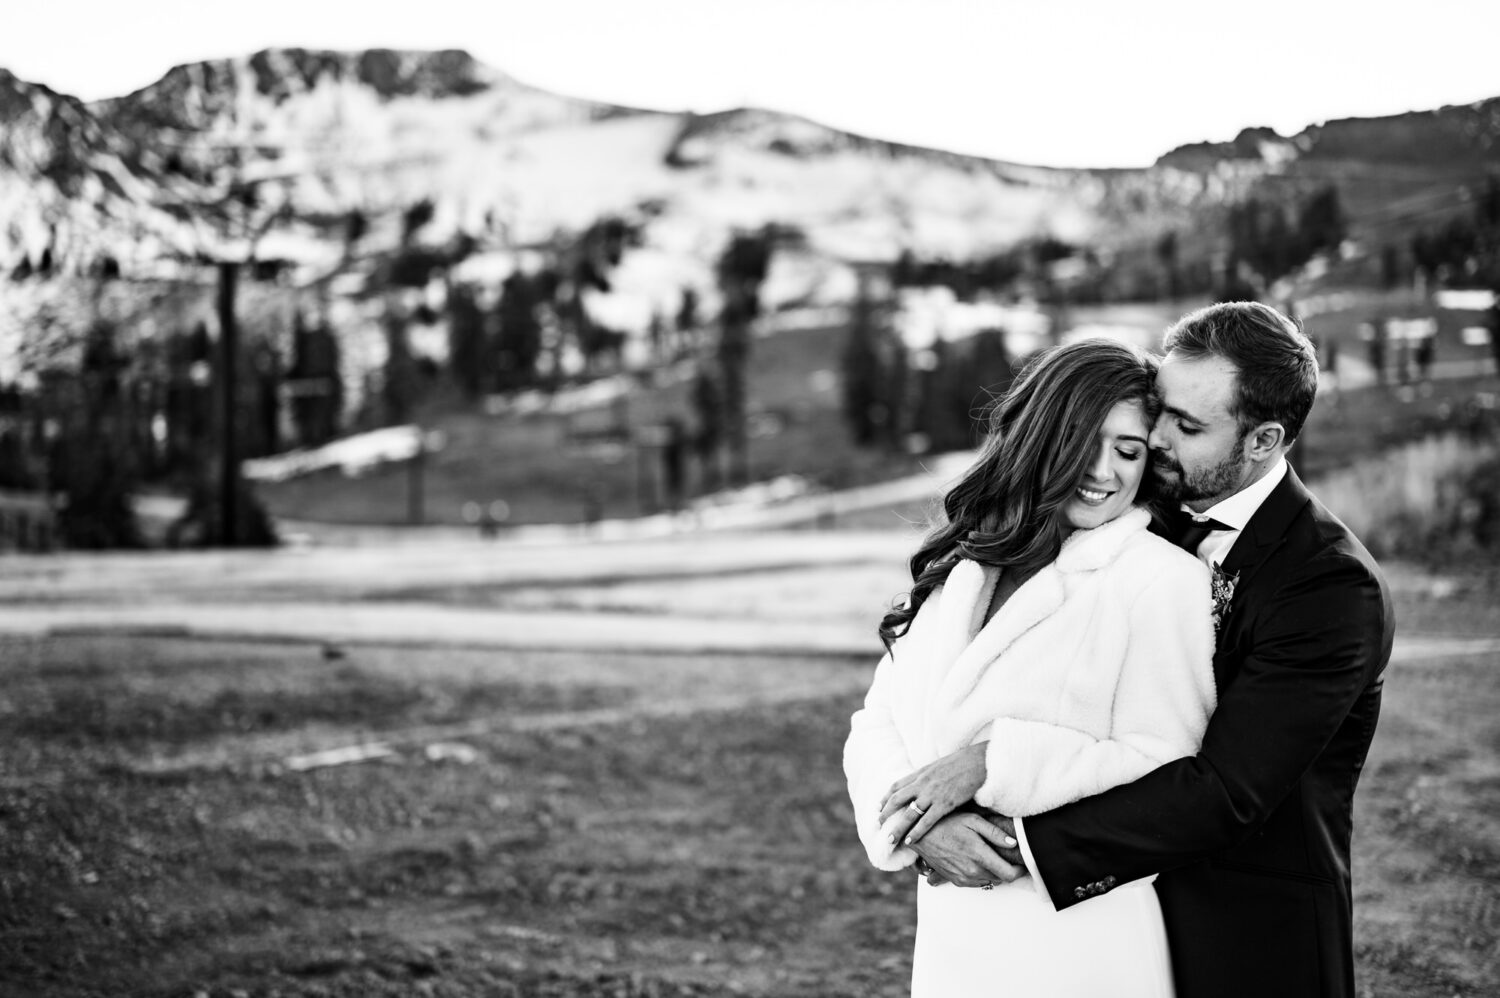 Fall is a great time for snowy mountain wedding photos at Palisades.